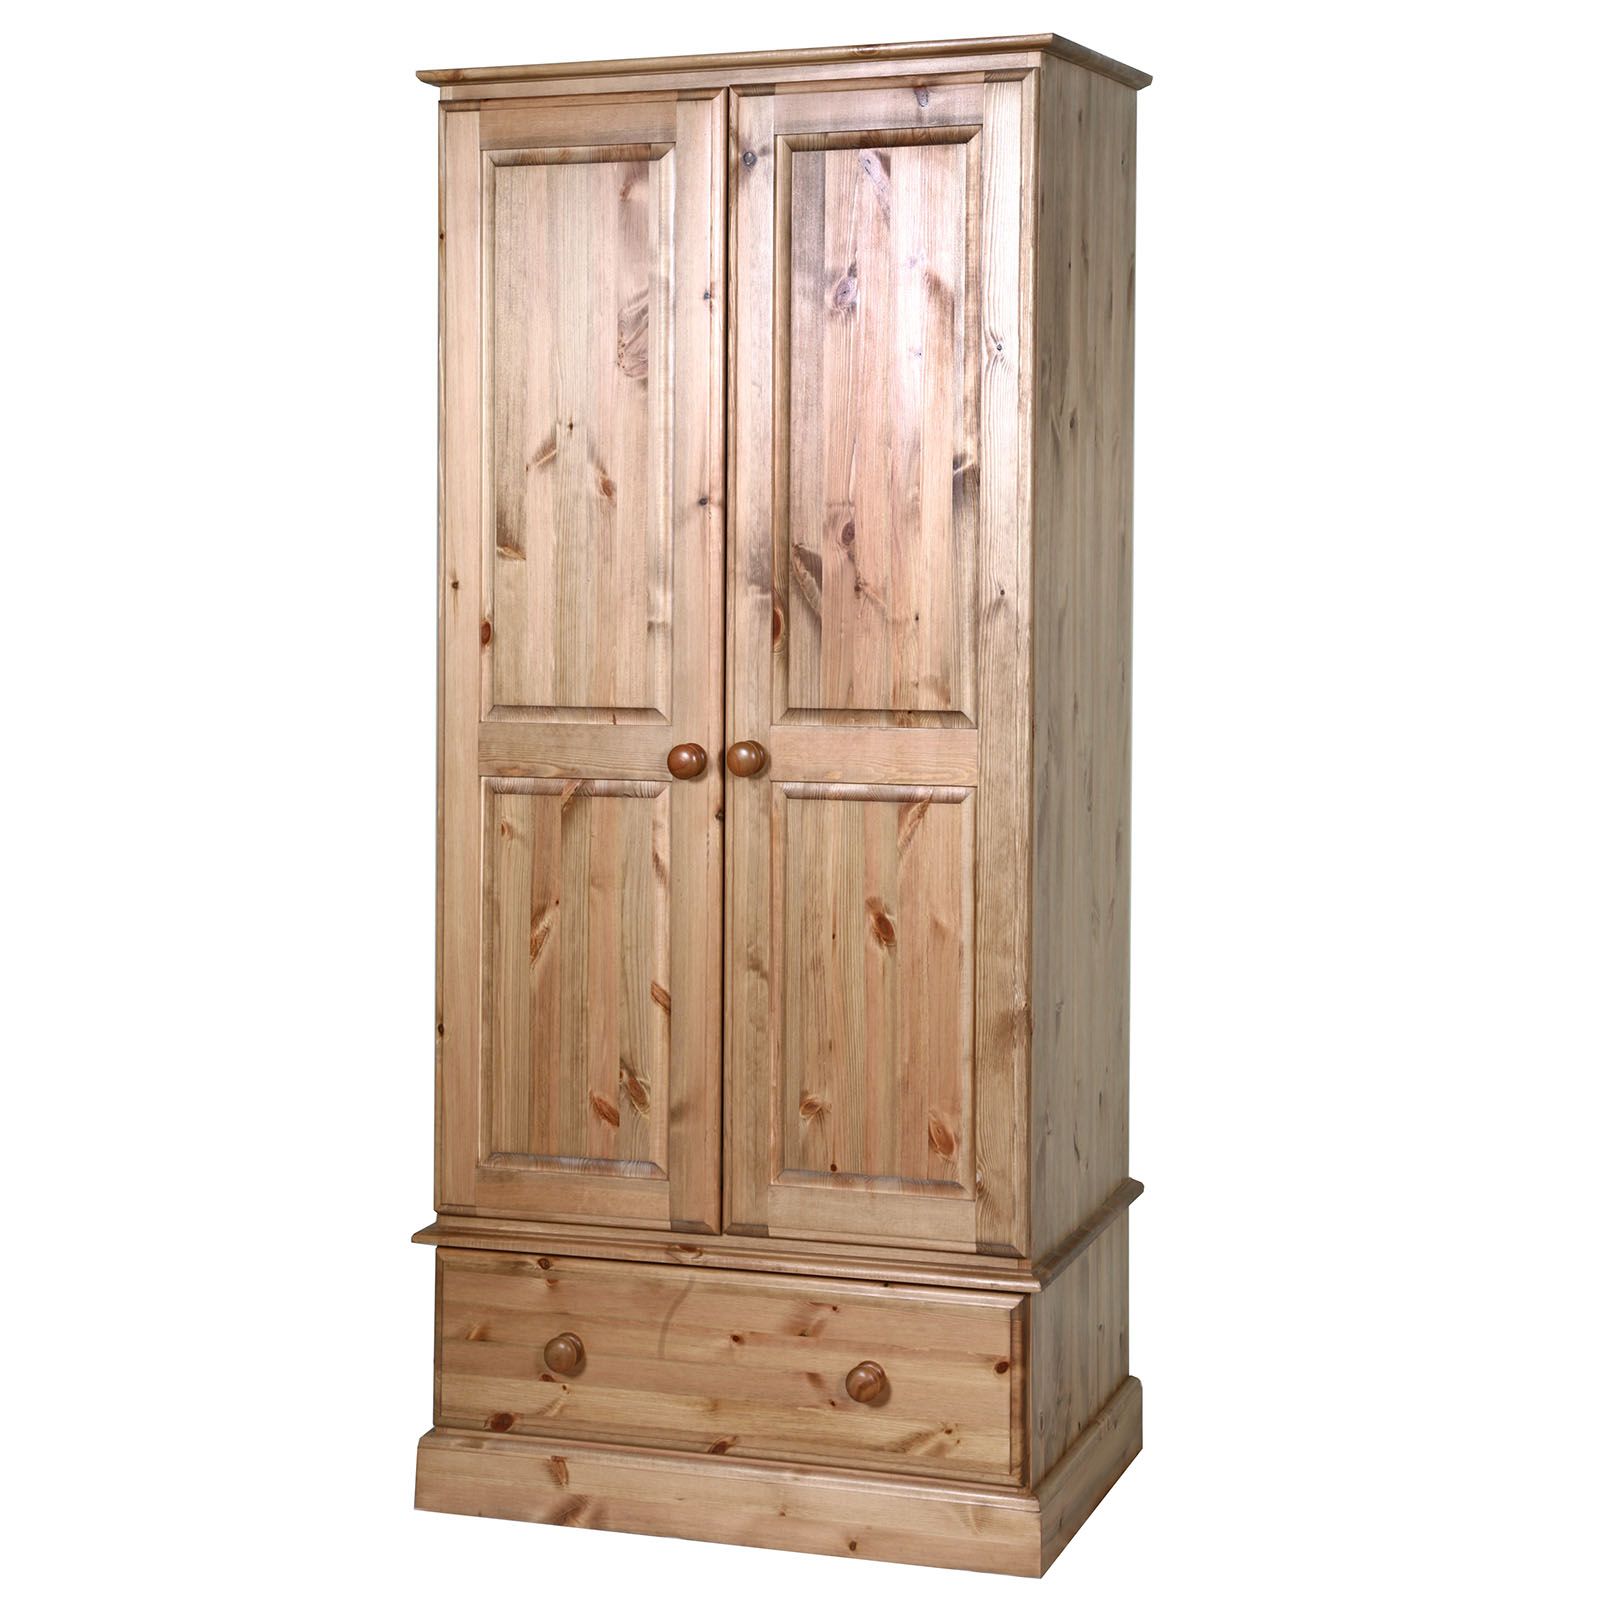 Double Wardrobe (1x Drawer) Solid Pine – Realwoods For Pine Wardrobes With Drawers (View 10 of 20)